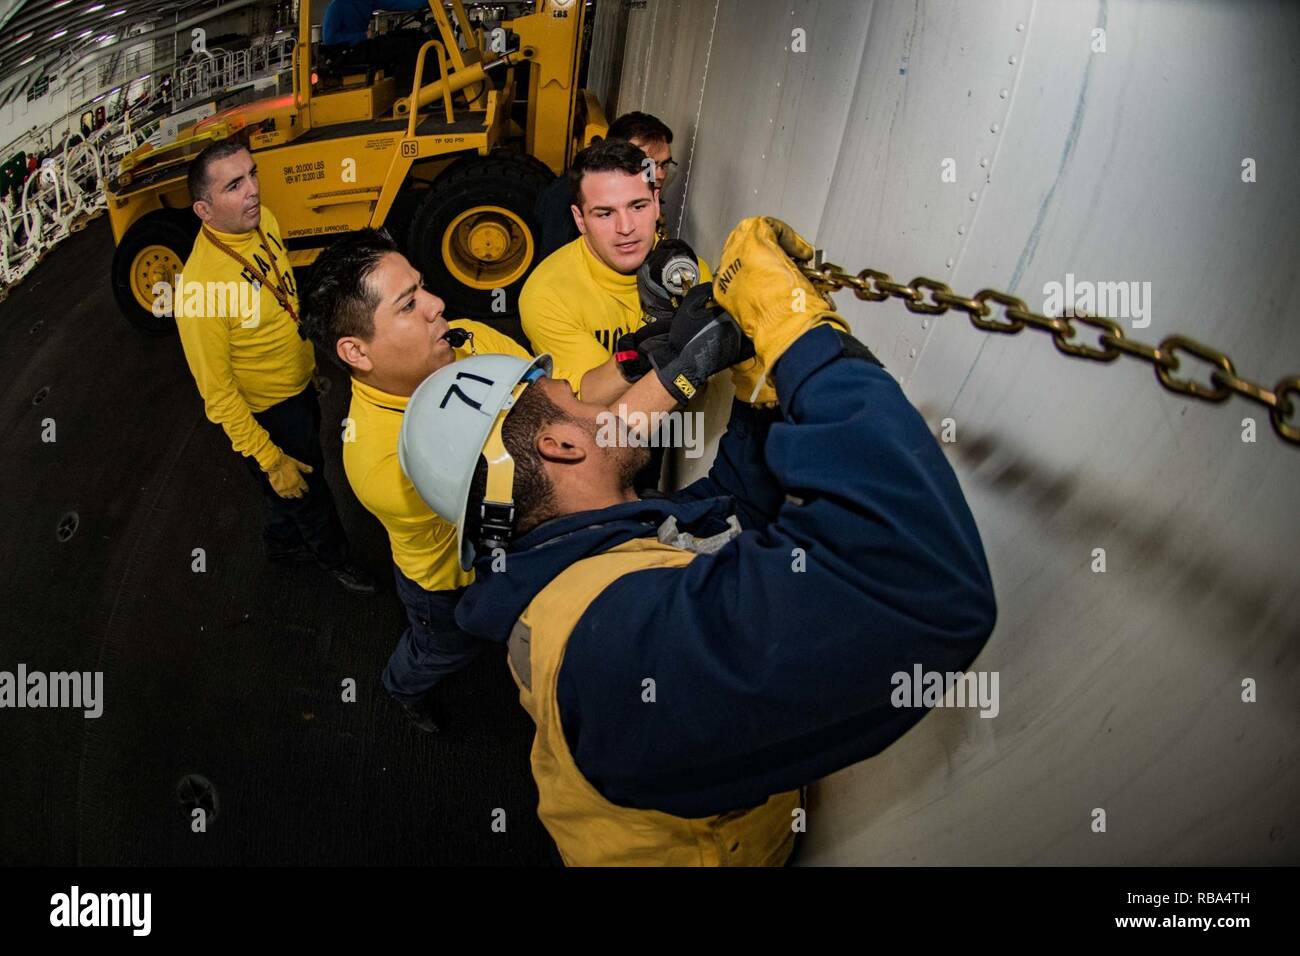 SAN DIEGO (Dec. 21 2016) Sailors secure a conex box to a forklift in the hangar bay of the aircraft carrier USS Theodore Roosevelt (CVN 71). Theodore Roosevelt is currently conducting exercises in the U.S. 3rd Fleet area of operations at the conclusion of its six month Planned Incremental Availability. Stock Photo